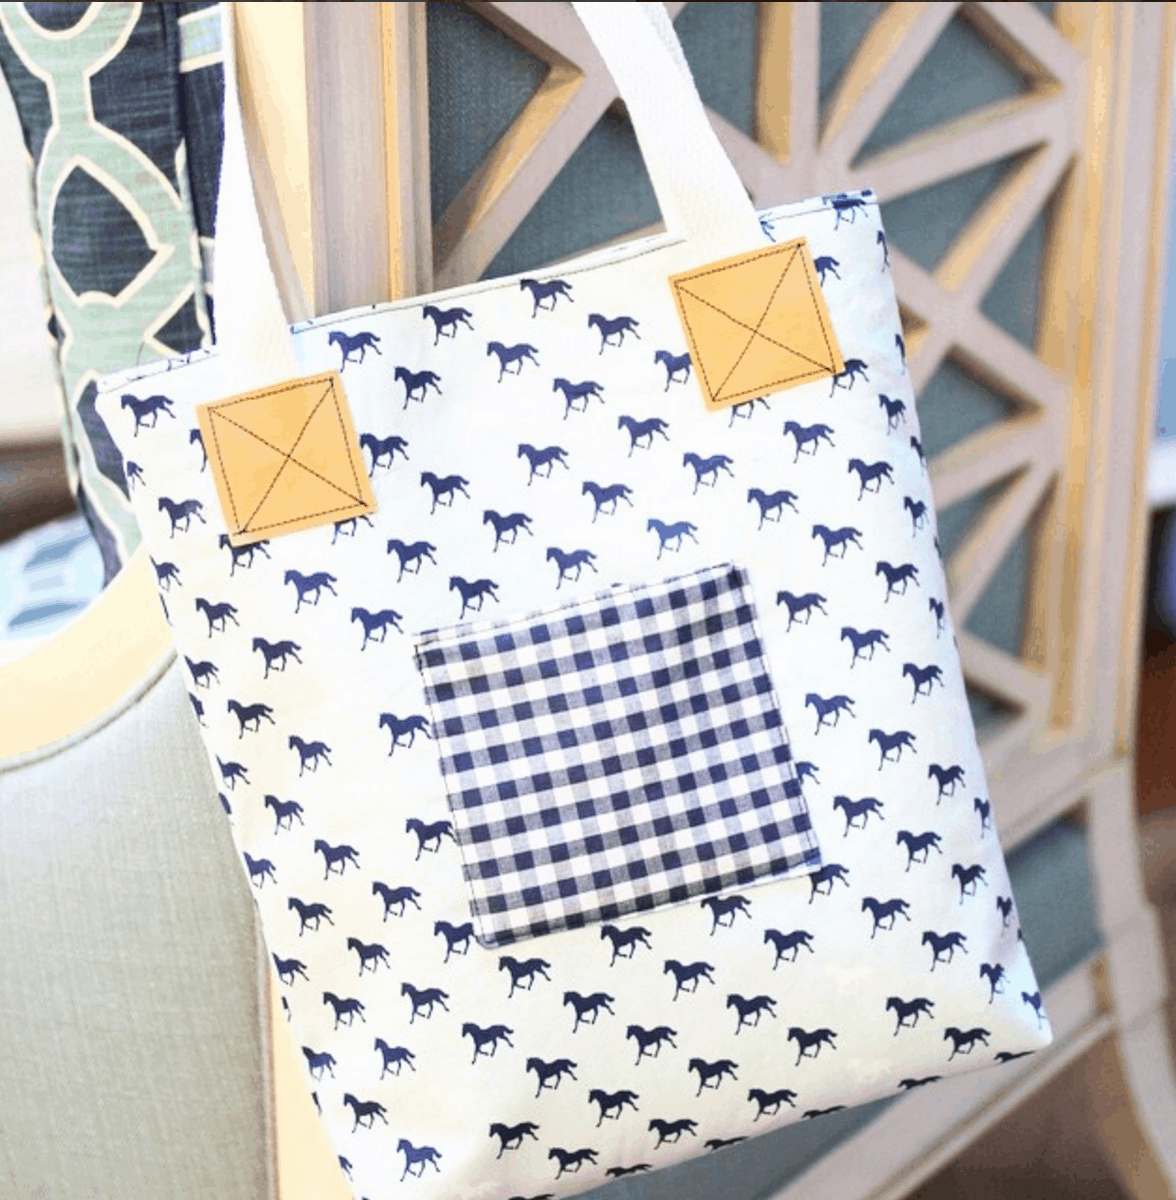 The Derby Tote Bag Sewing Pattern; great simple and versatile tote bag pattern that features 3 different front pocket styles. Great project for a beginning sewist. 